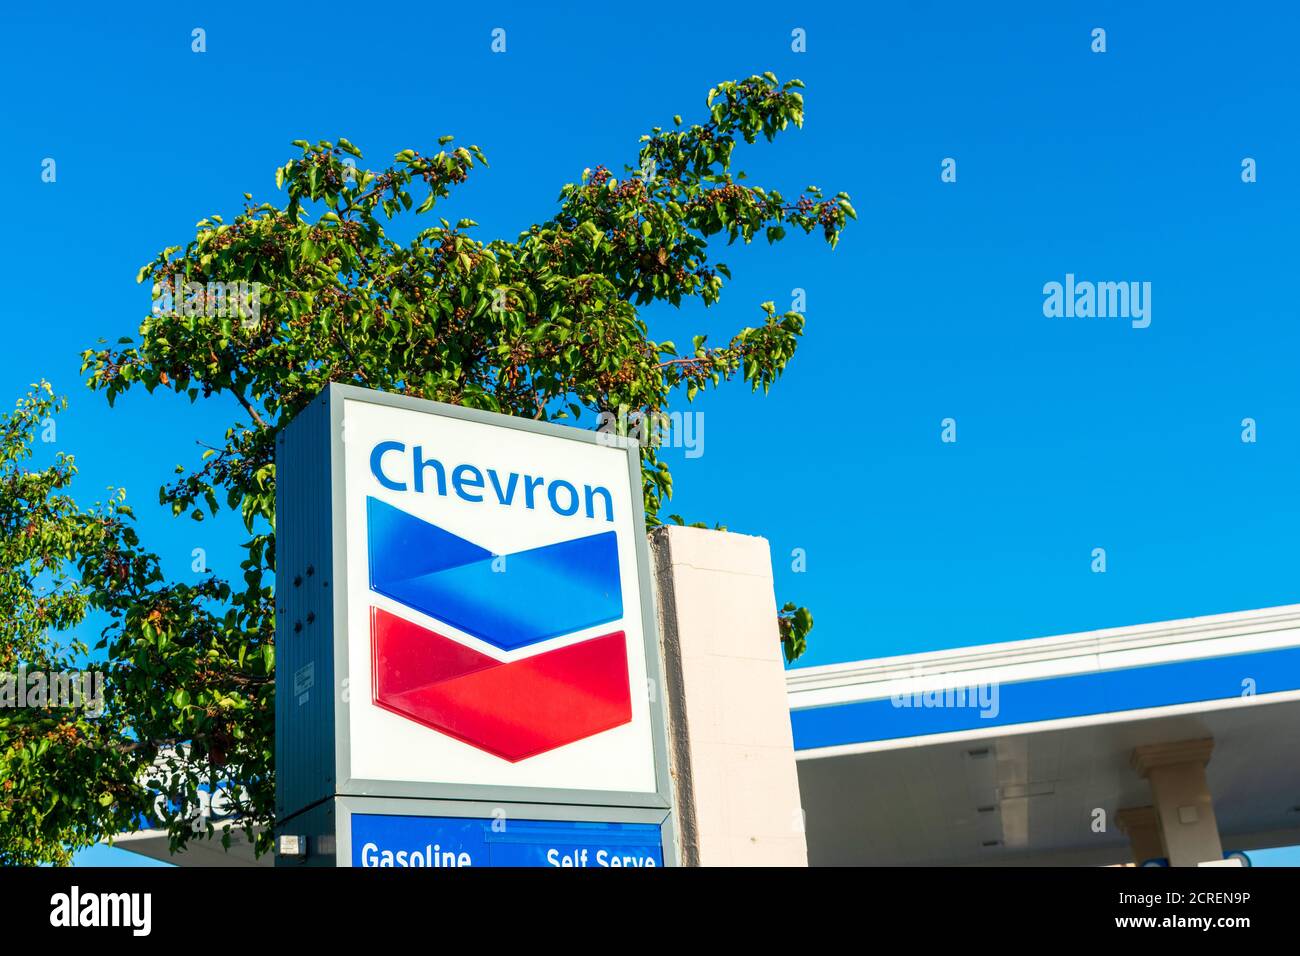 Chevron oil industry company sign at Chevron gas station against tree and  blue sky - San Jose, California, USA - 2020 Stock Photo - Alamy